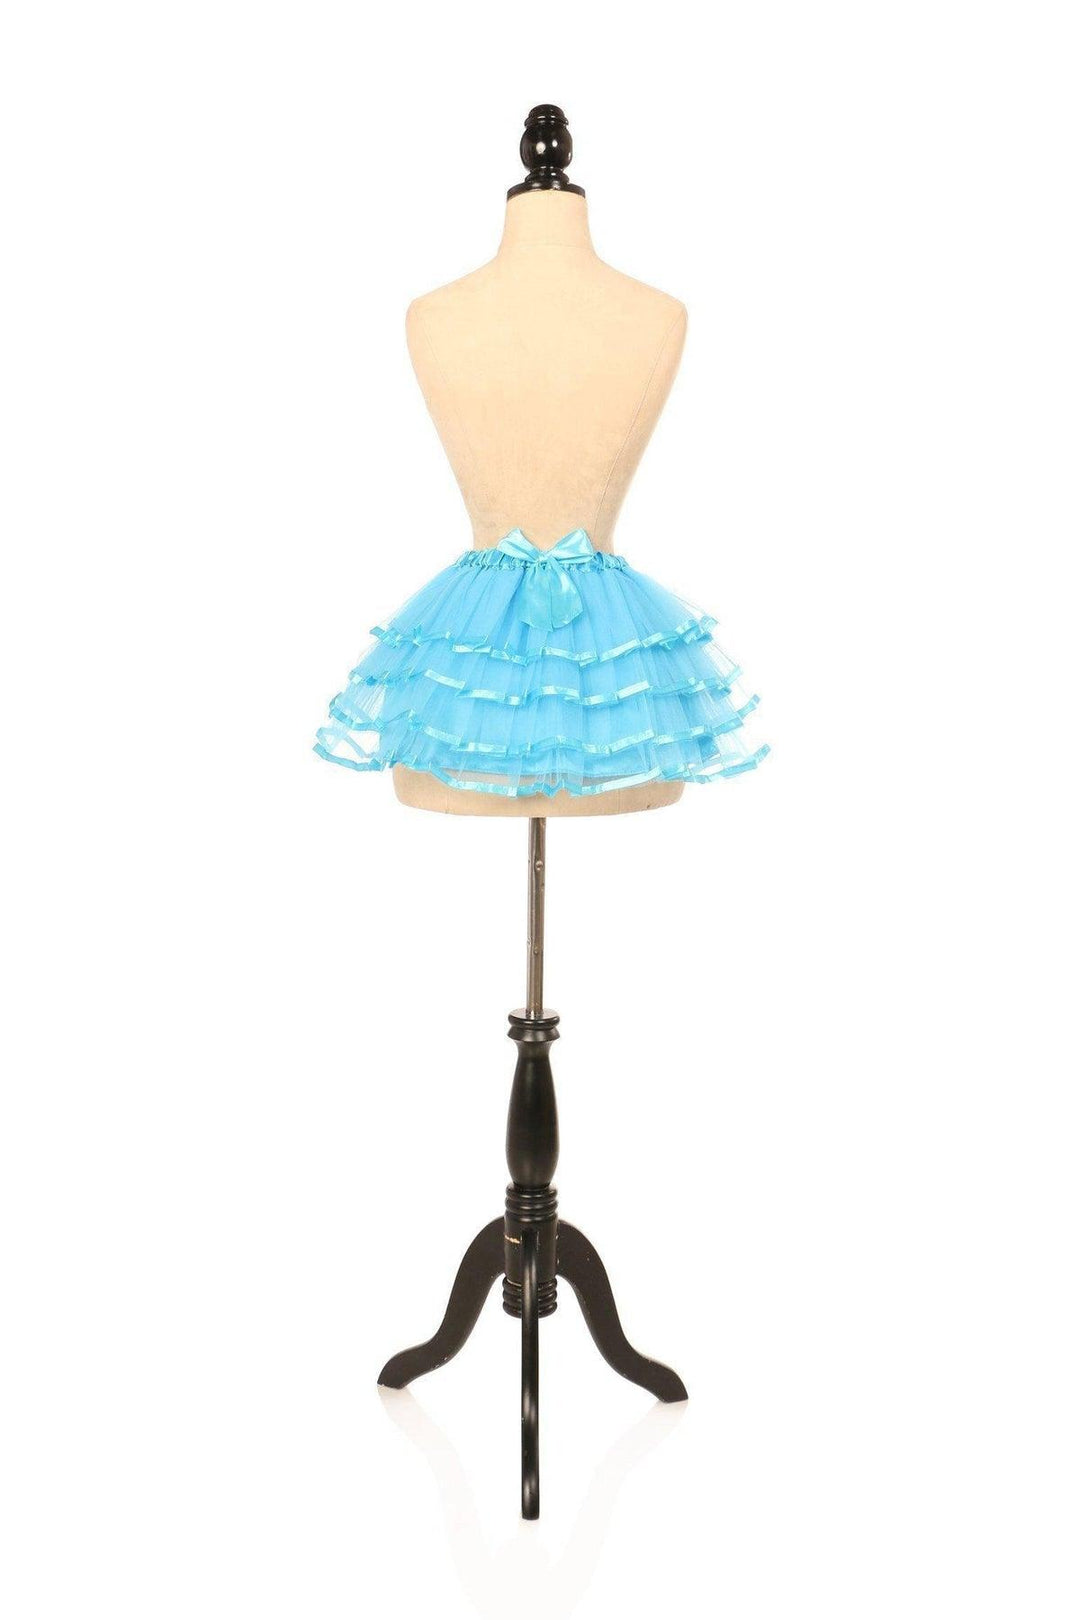 Turquoise Ribbon Tutu by Daisy-Daisy Corsets-SEXYSHOES.COM